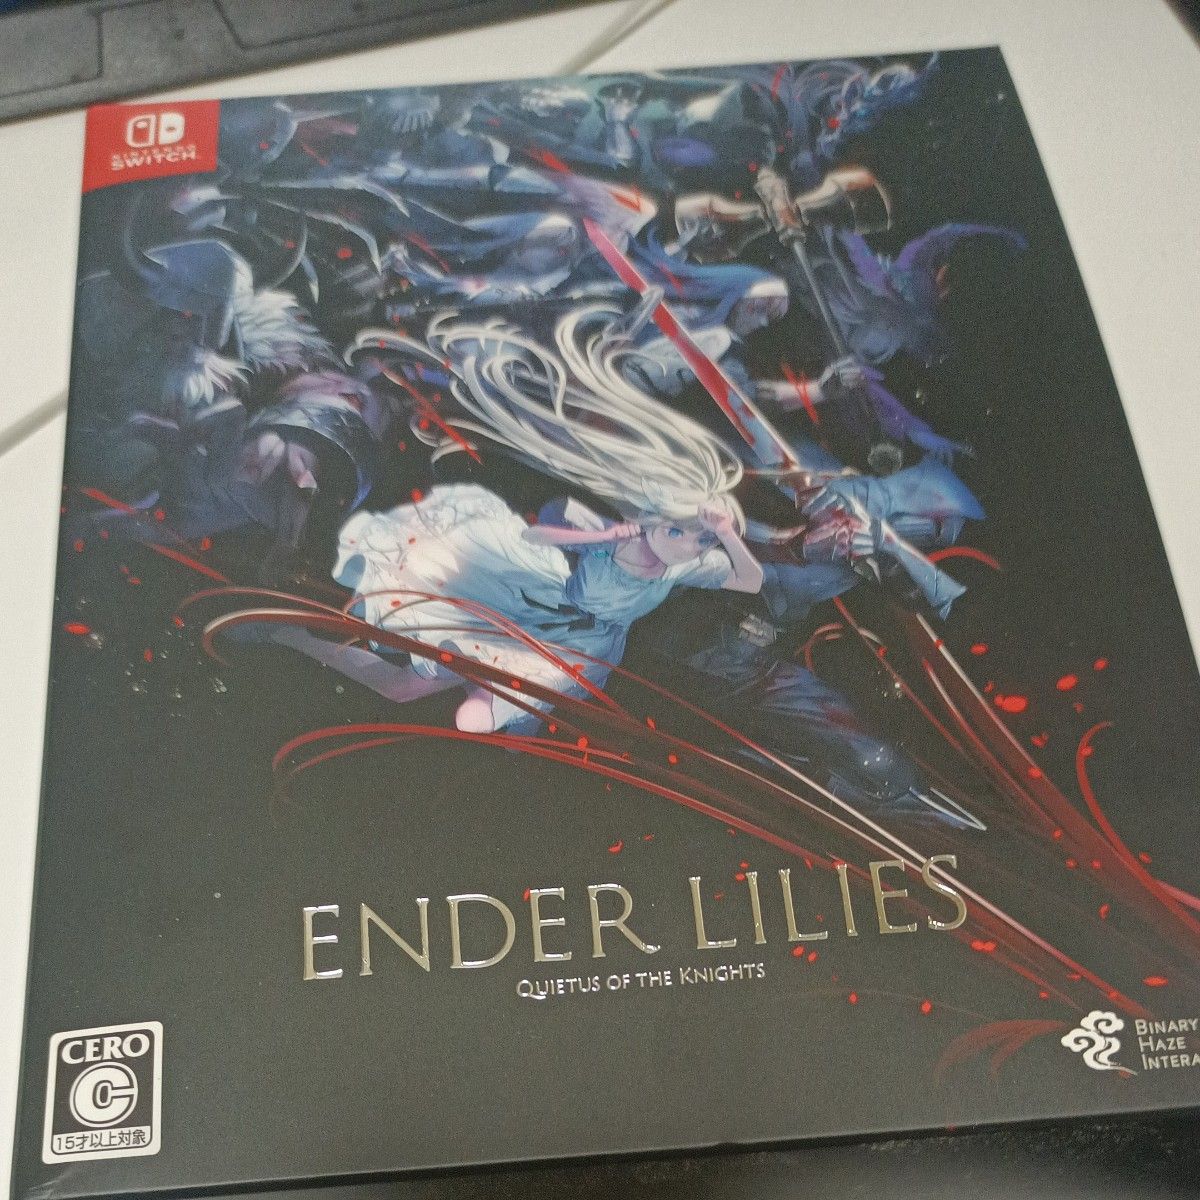 【Switch】 ENDER LILIES: Quietus of the Knights [数量限定版]